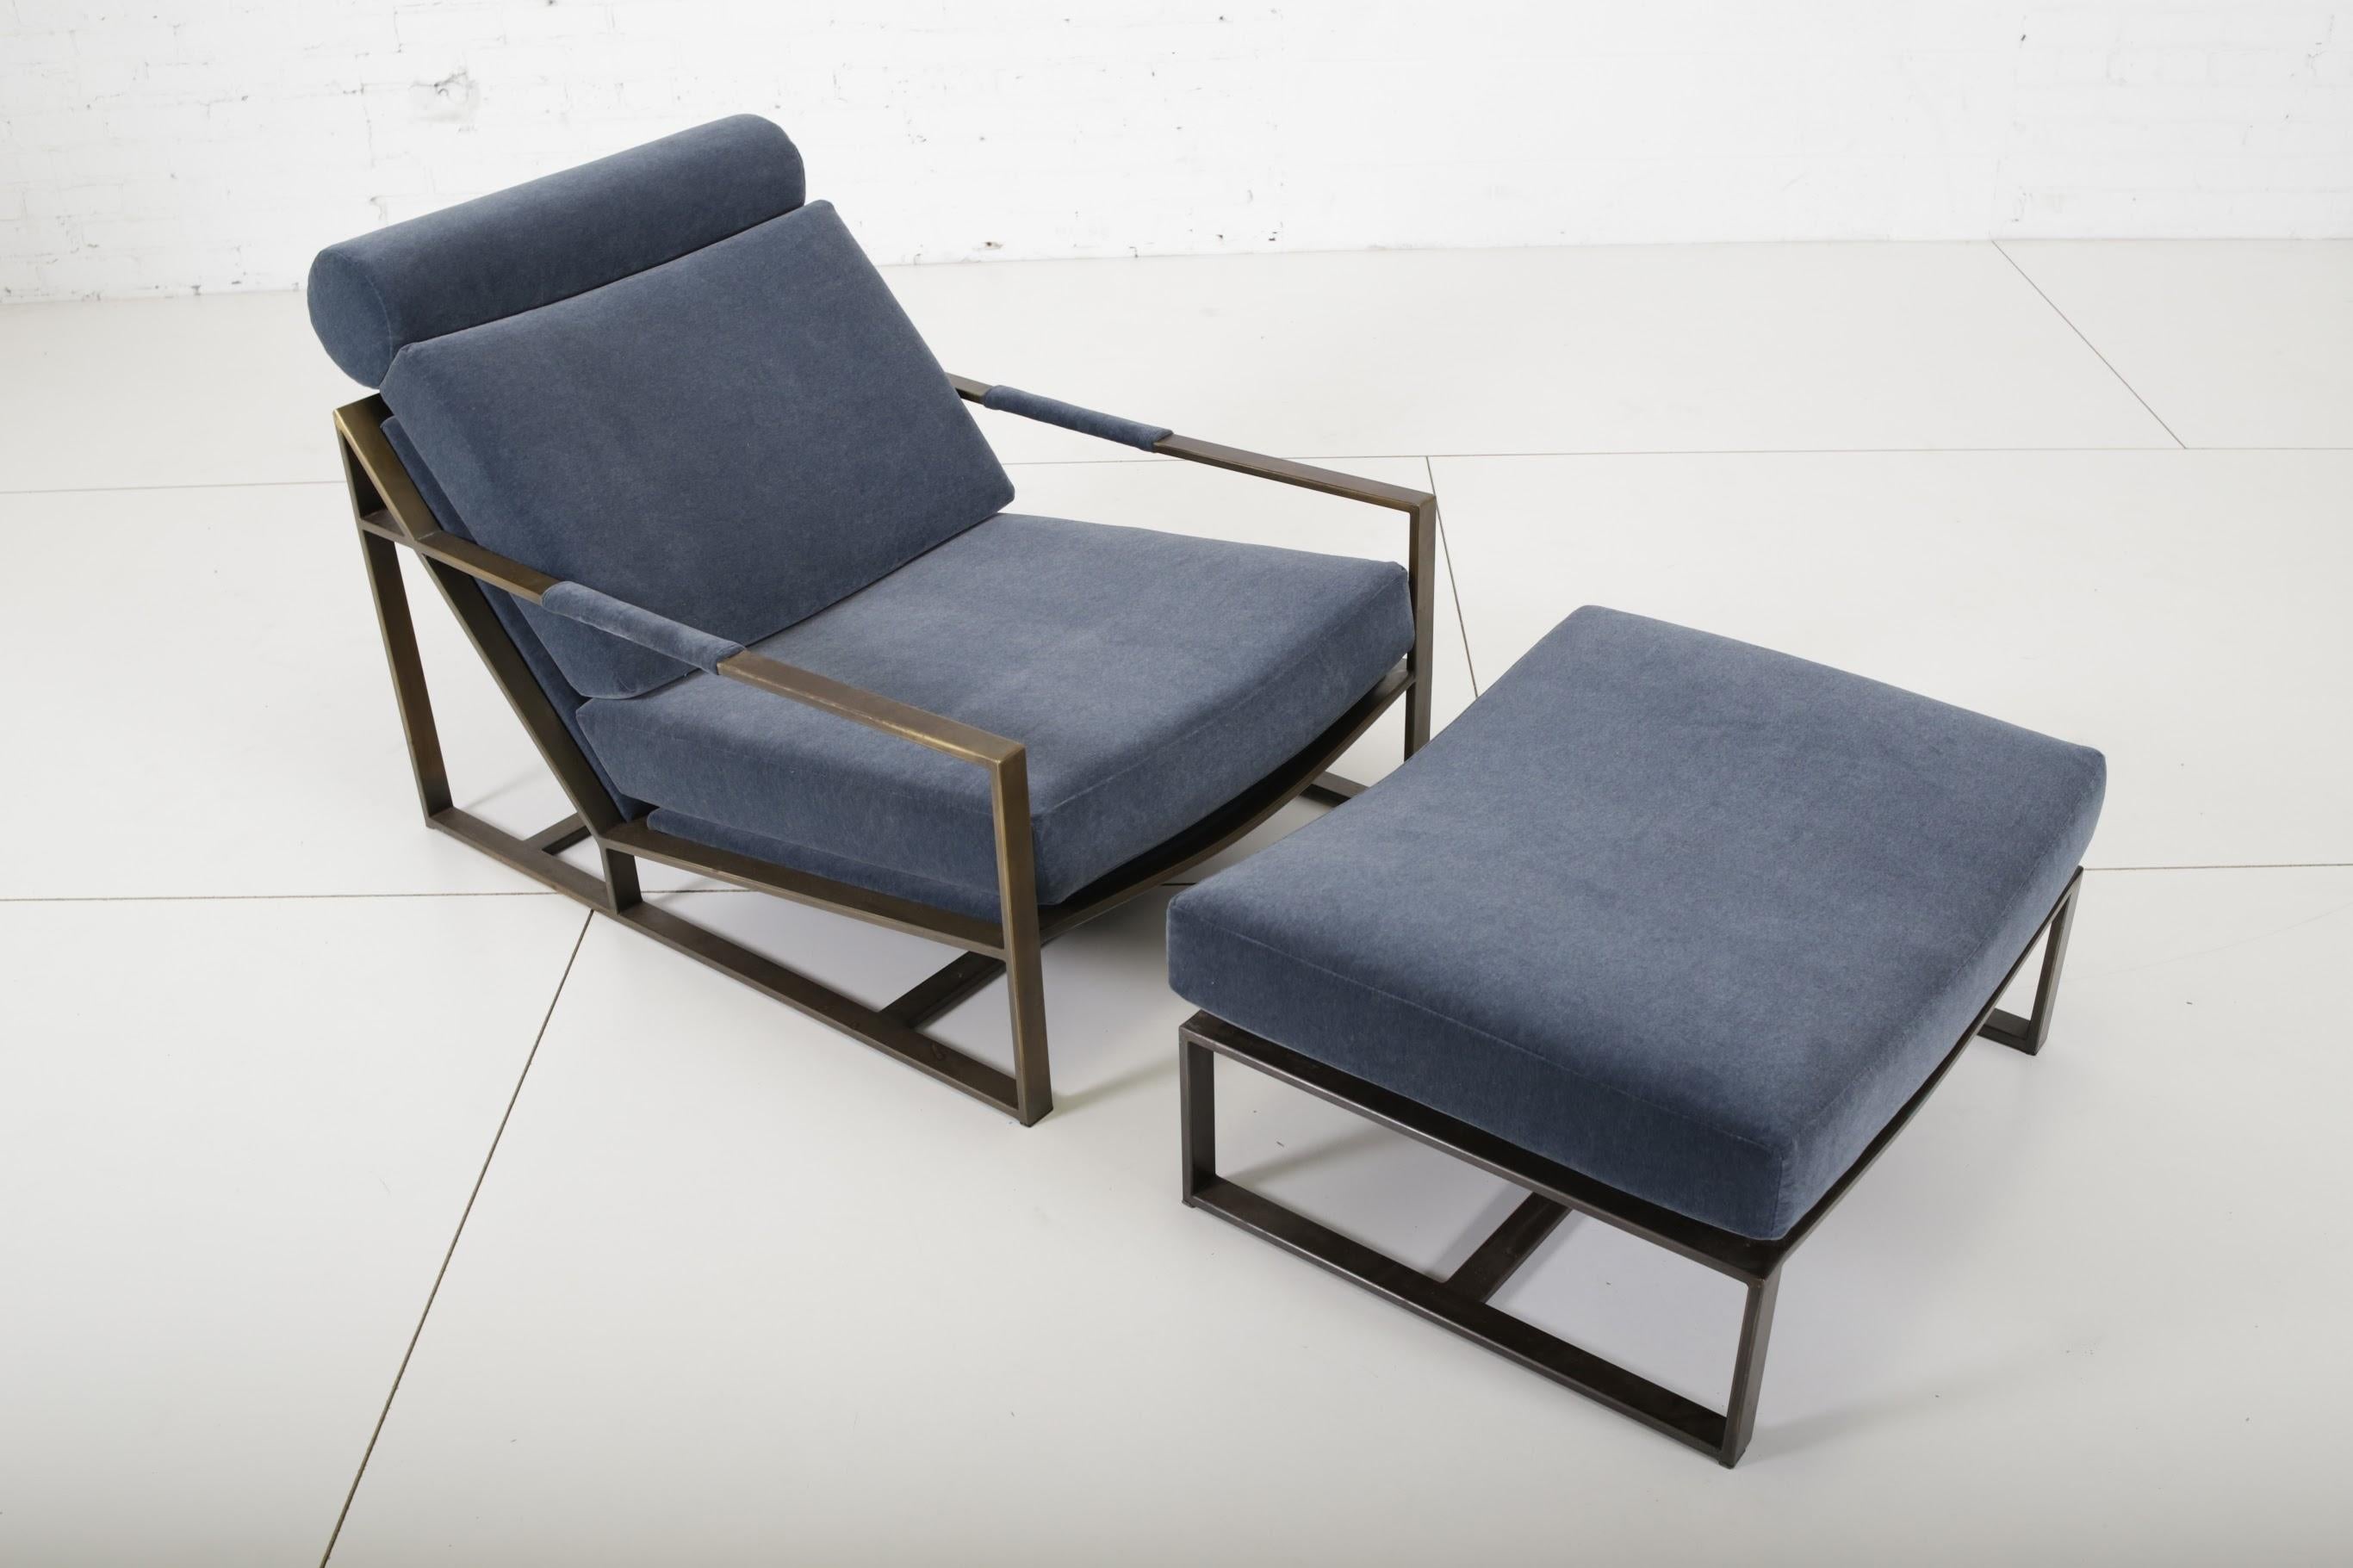 Milo Baughman frame chair with ottoman designed and manufactured in 1965. Fully restored and reupholstered in mohair.